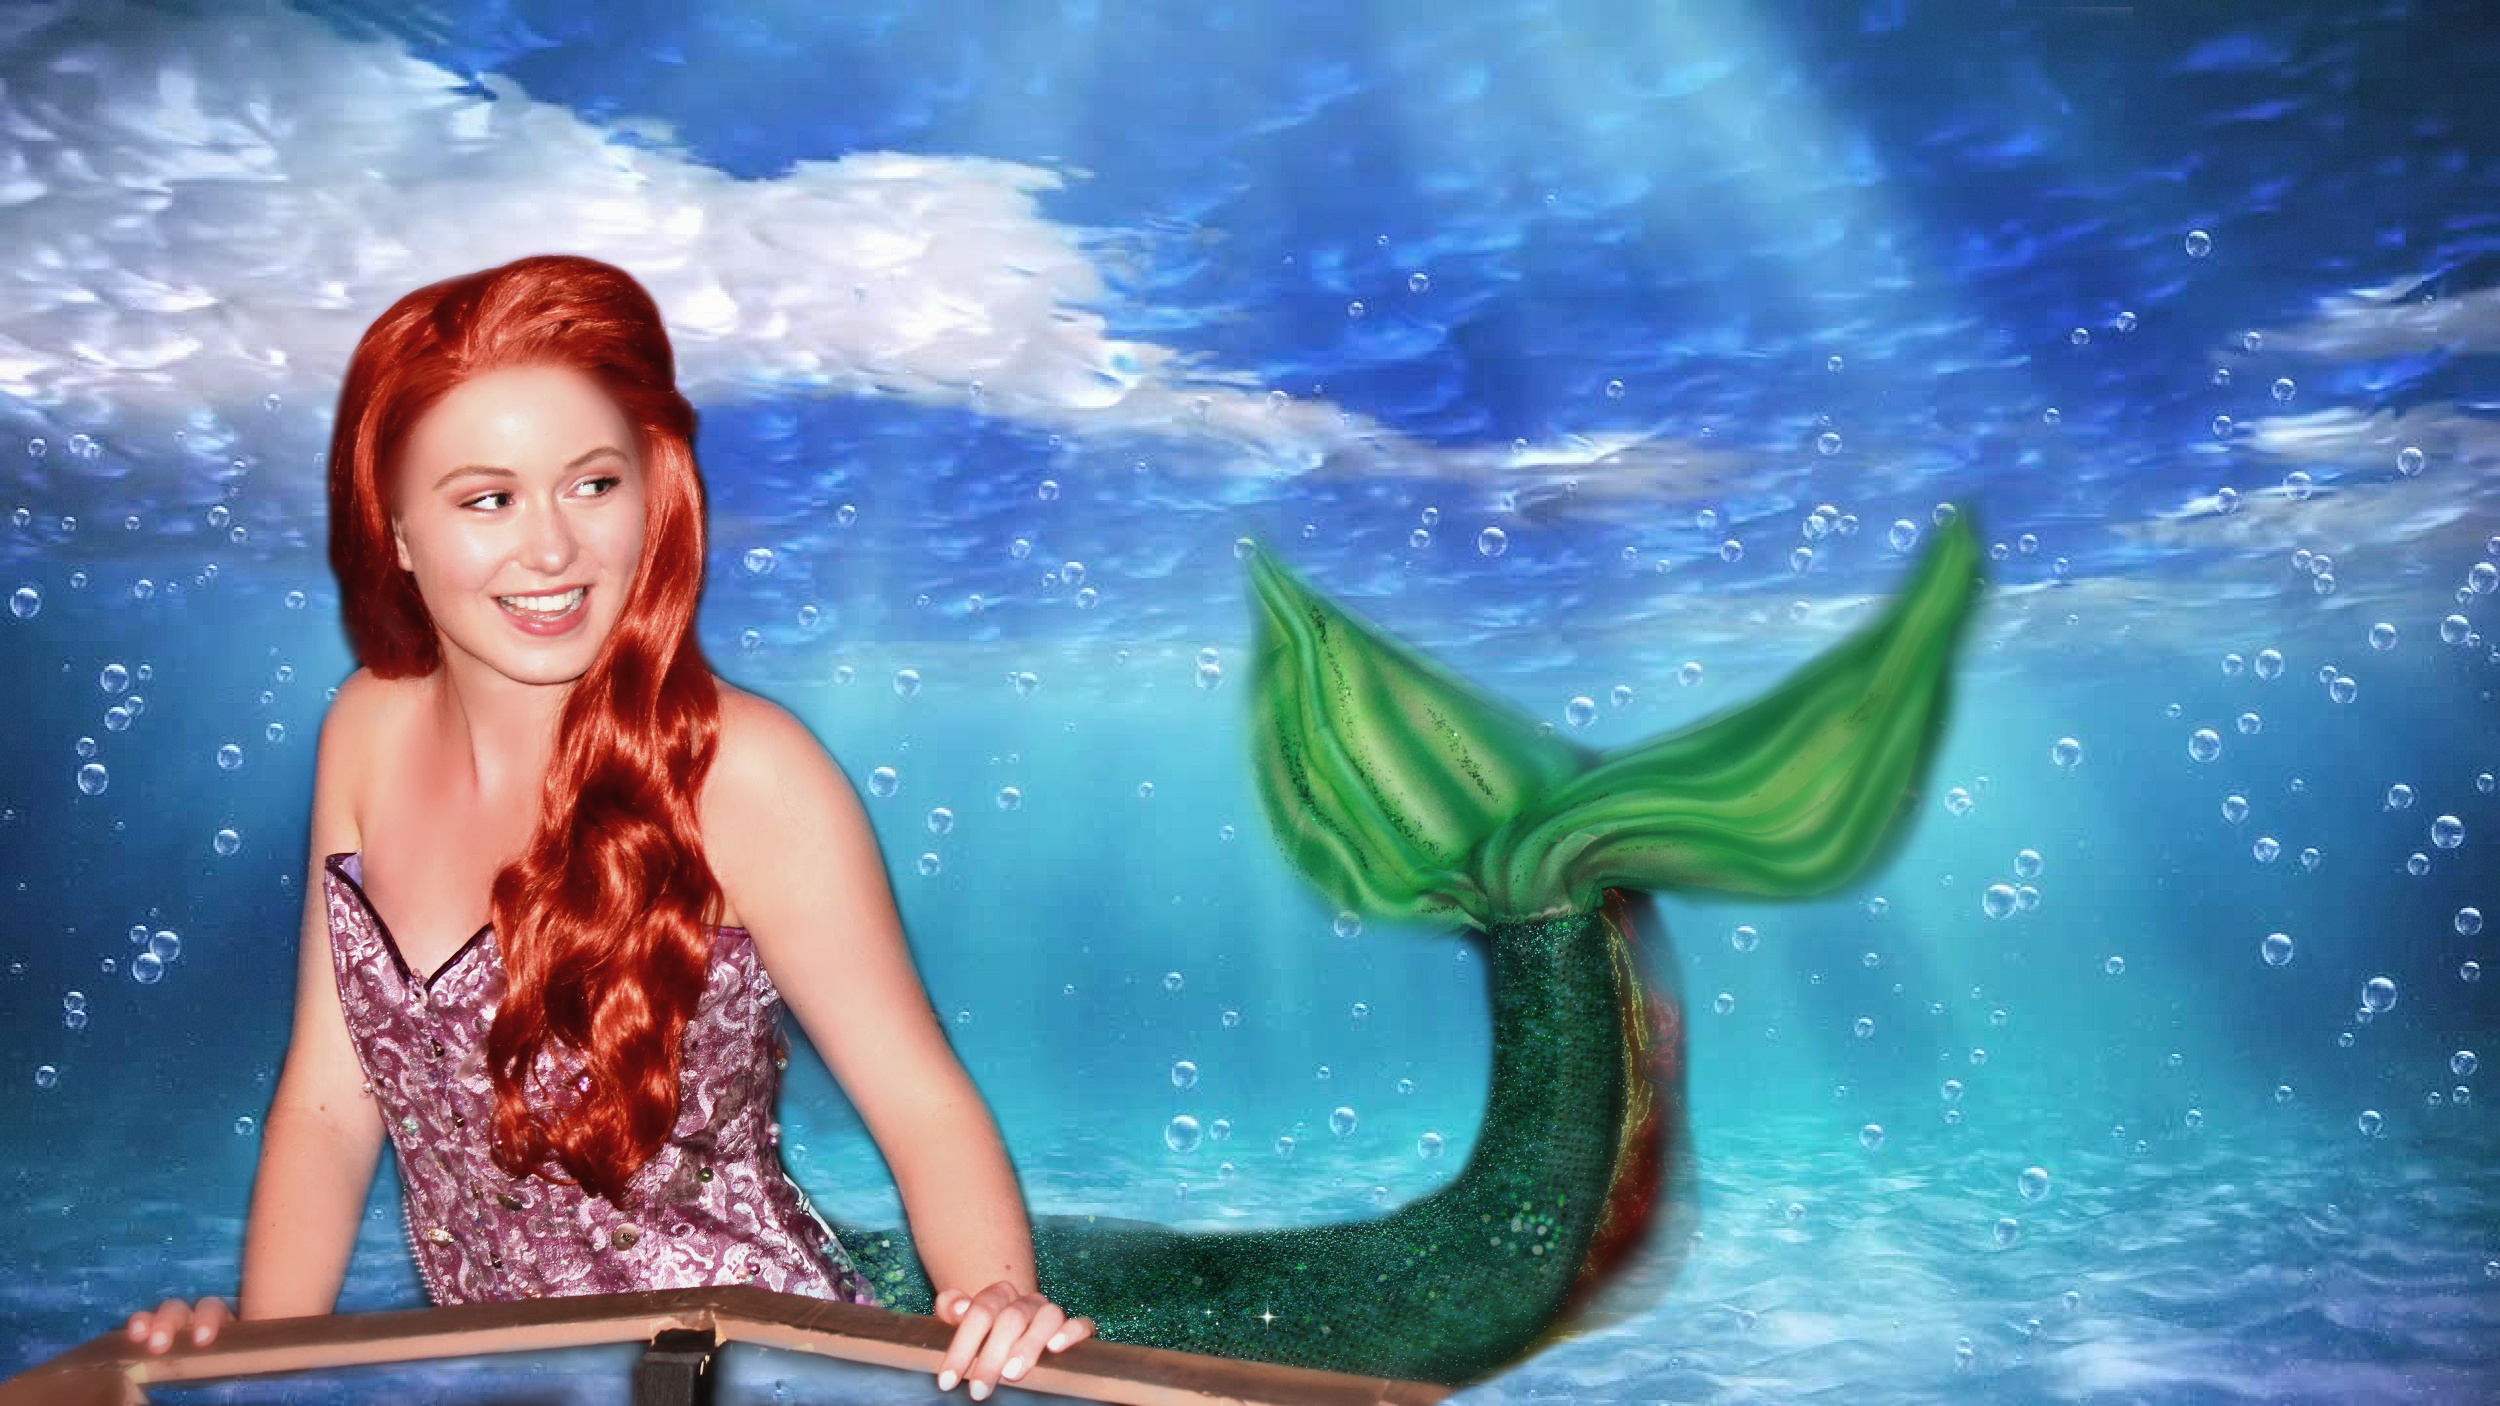 In the World Above! 16 year old Covington Reardon stars as Ariel in Bravo's production of Disney's The Little Mermaid.
